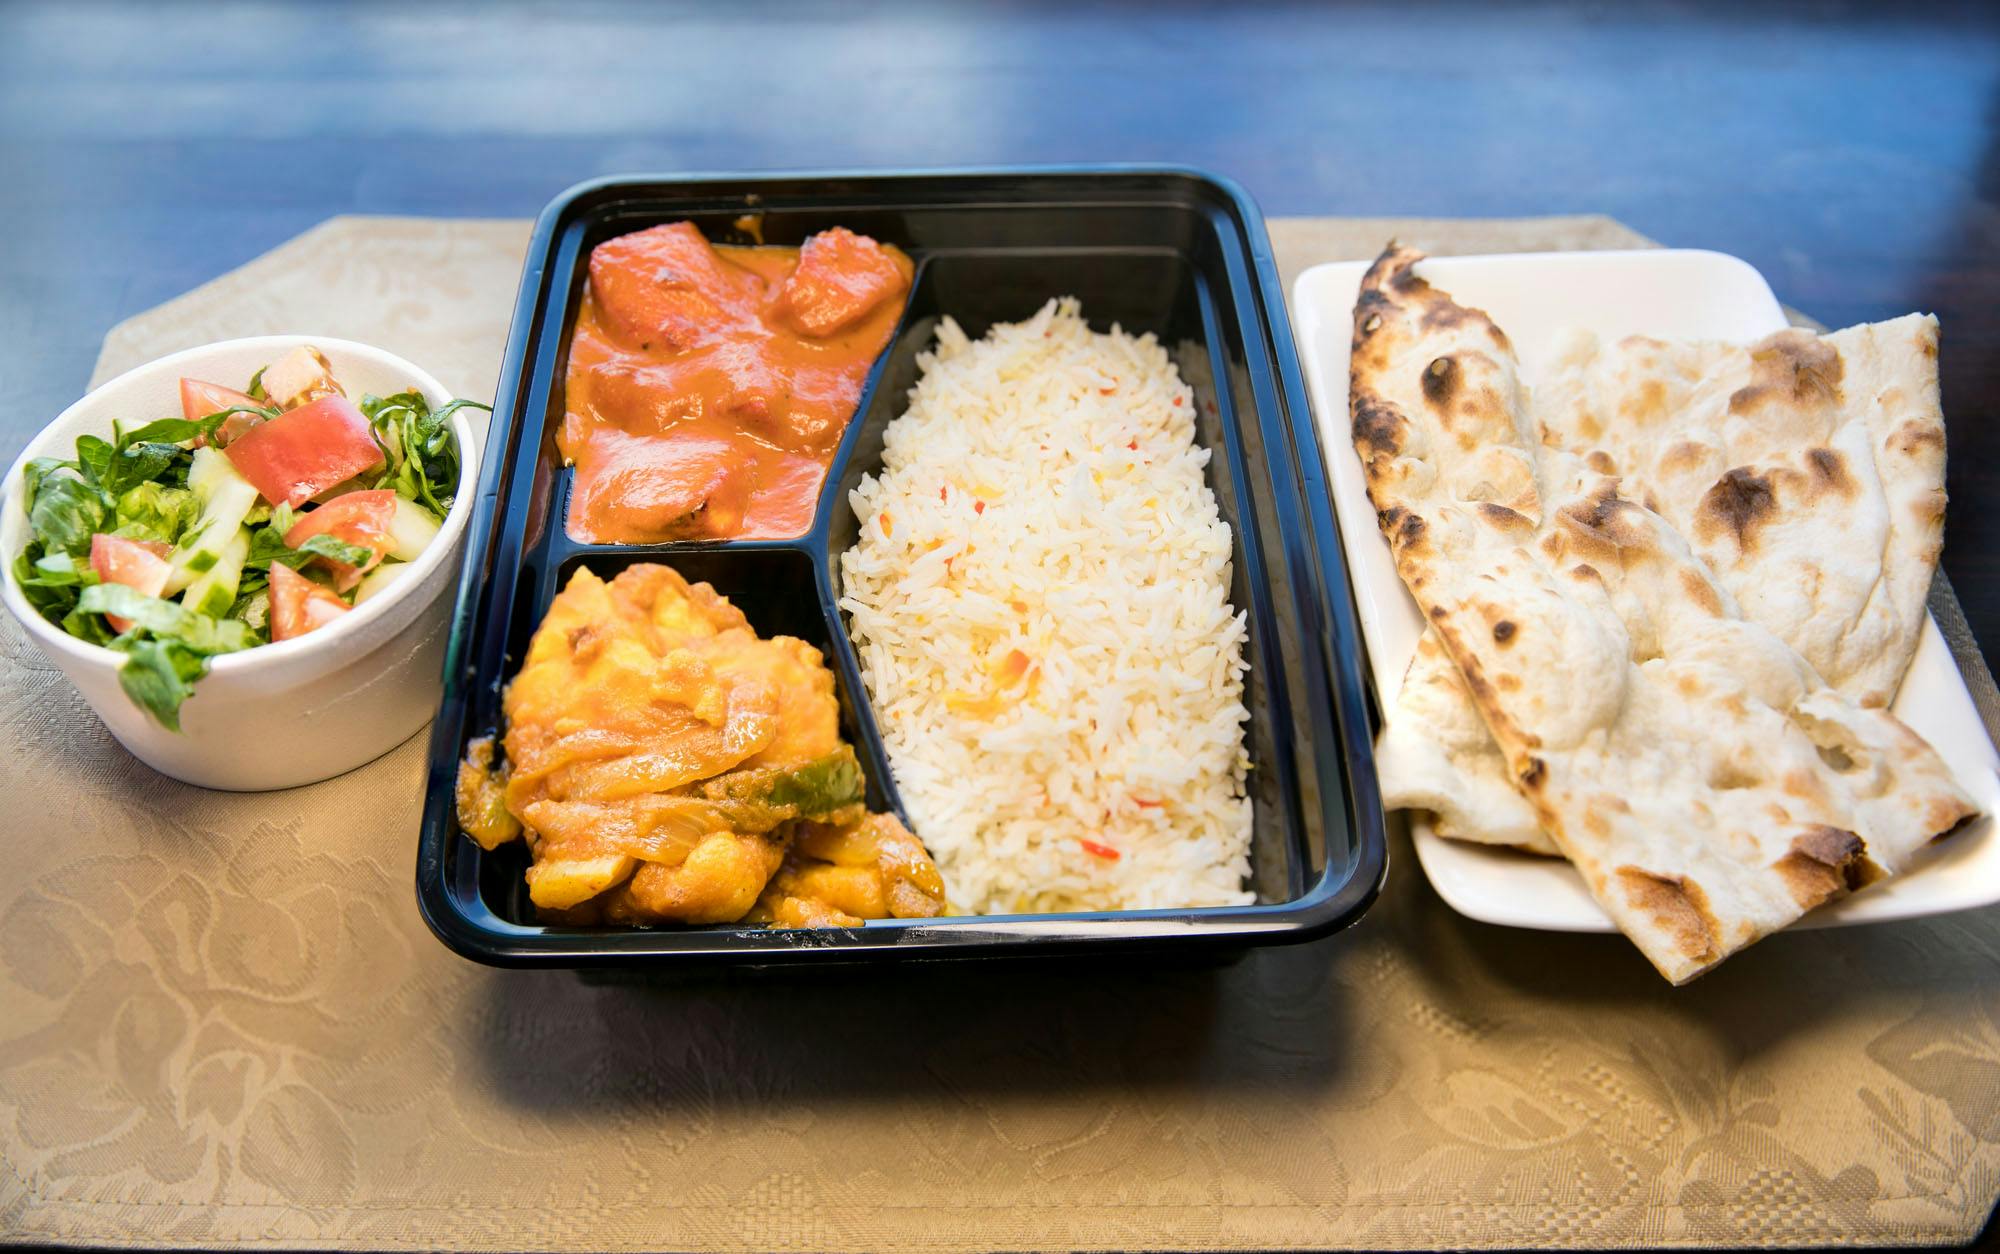 Meat & Vege Combo from Star Of India Tandoori Restaurant in Los Angeles, CA